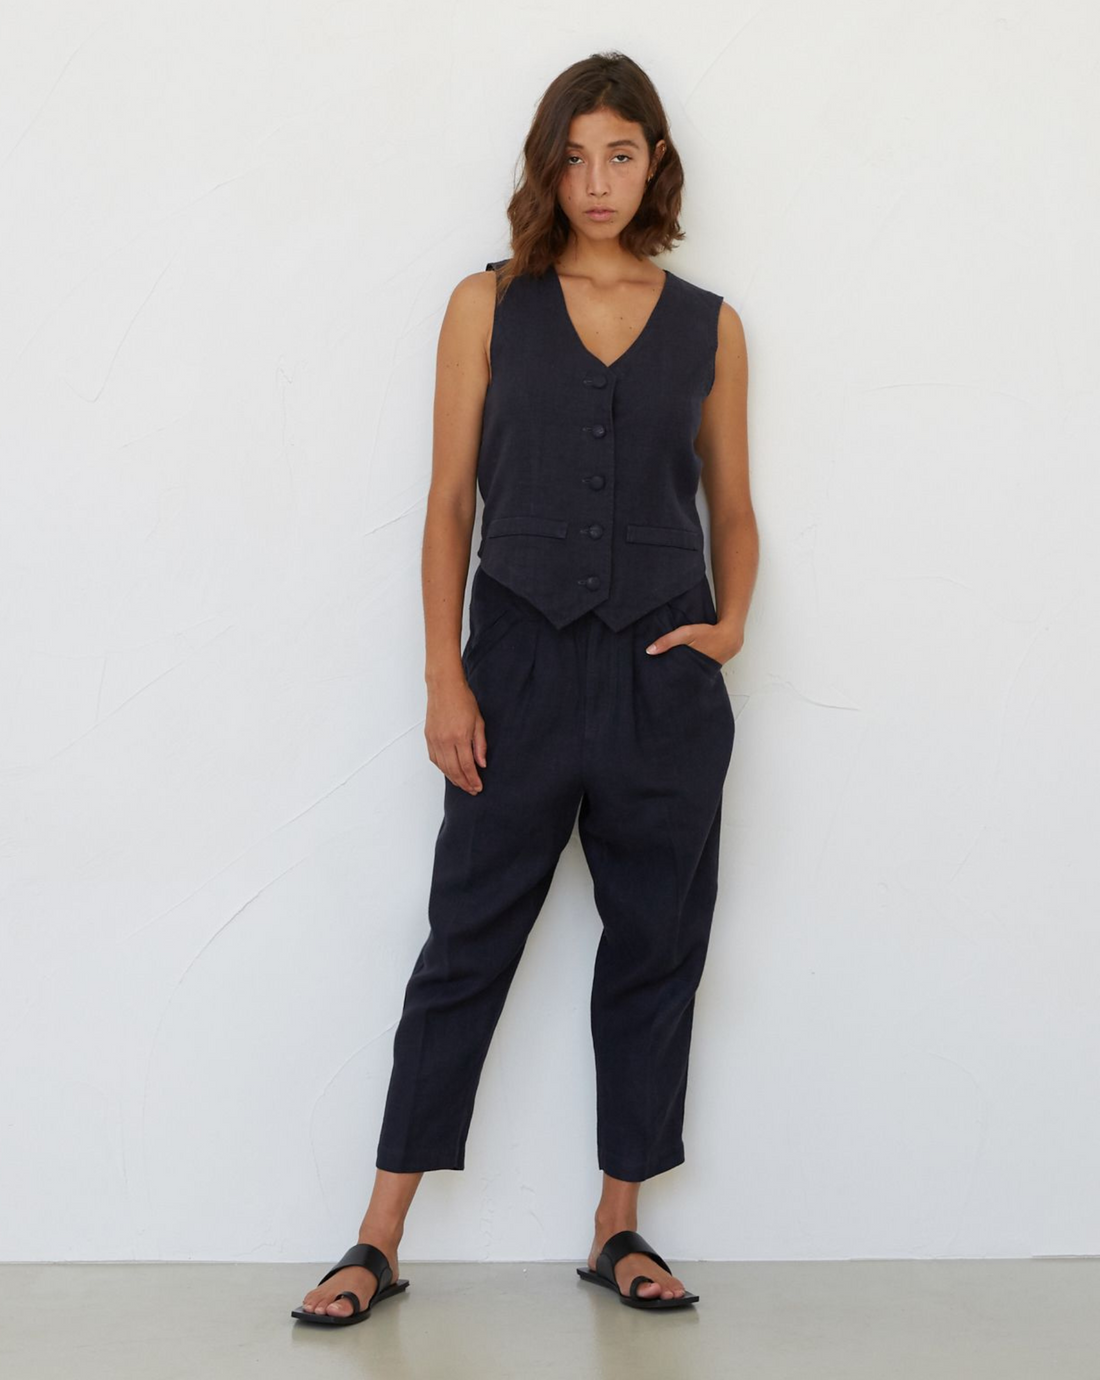 Tailored Pant (Petite) - French Navy